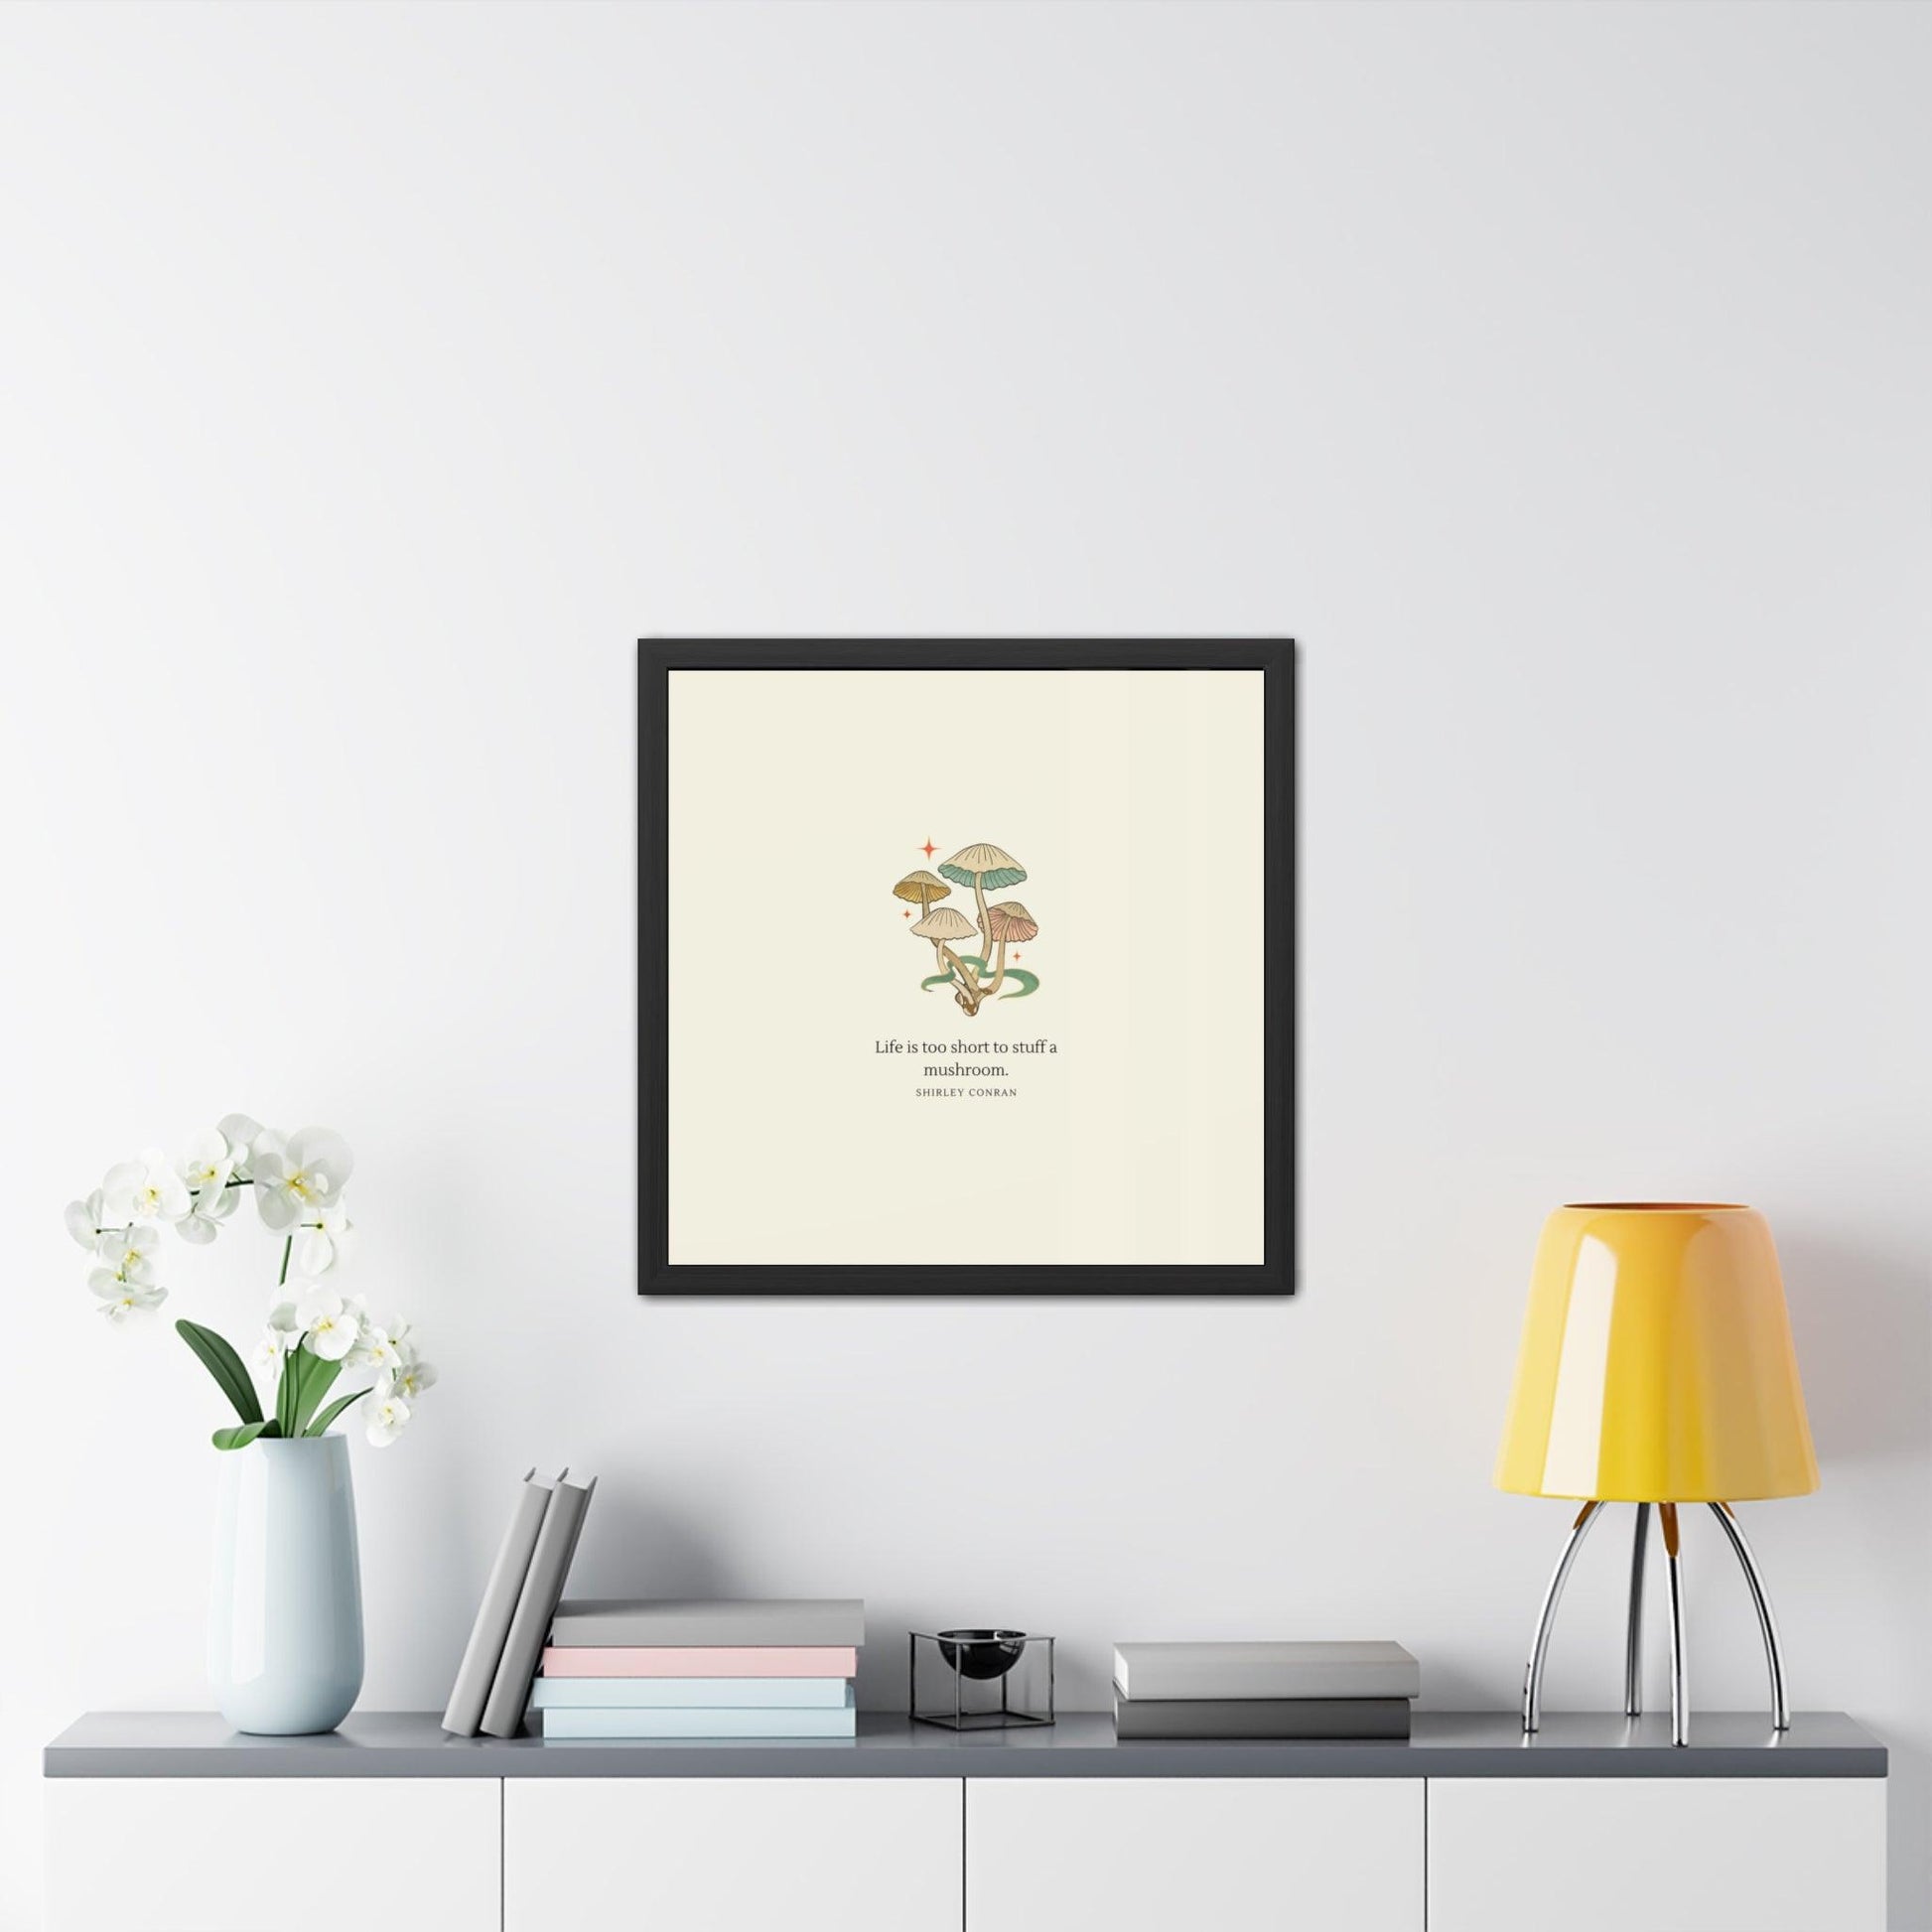 Life is too short to stuff a mushroom Framed Poster Wall Art - MAIA HOMES